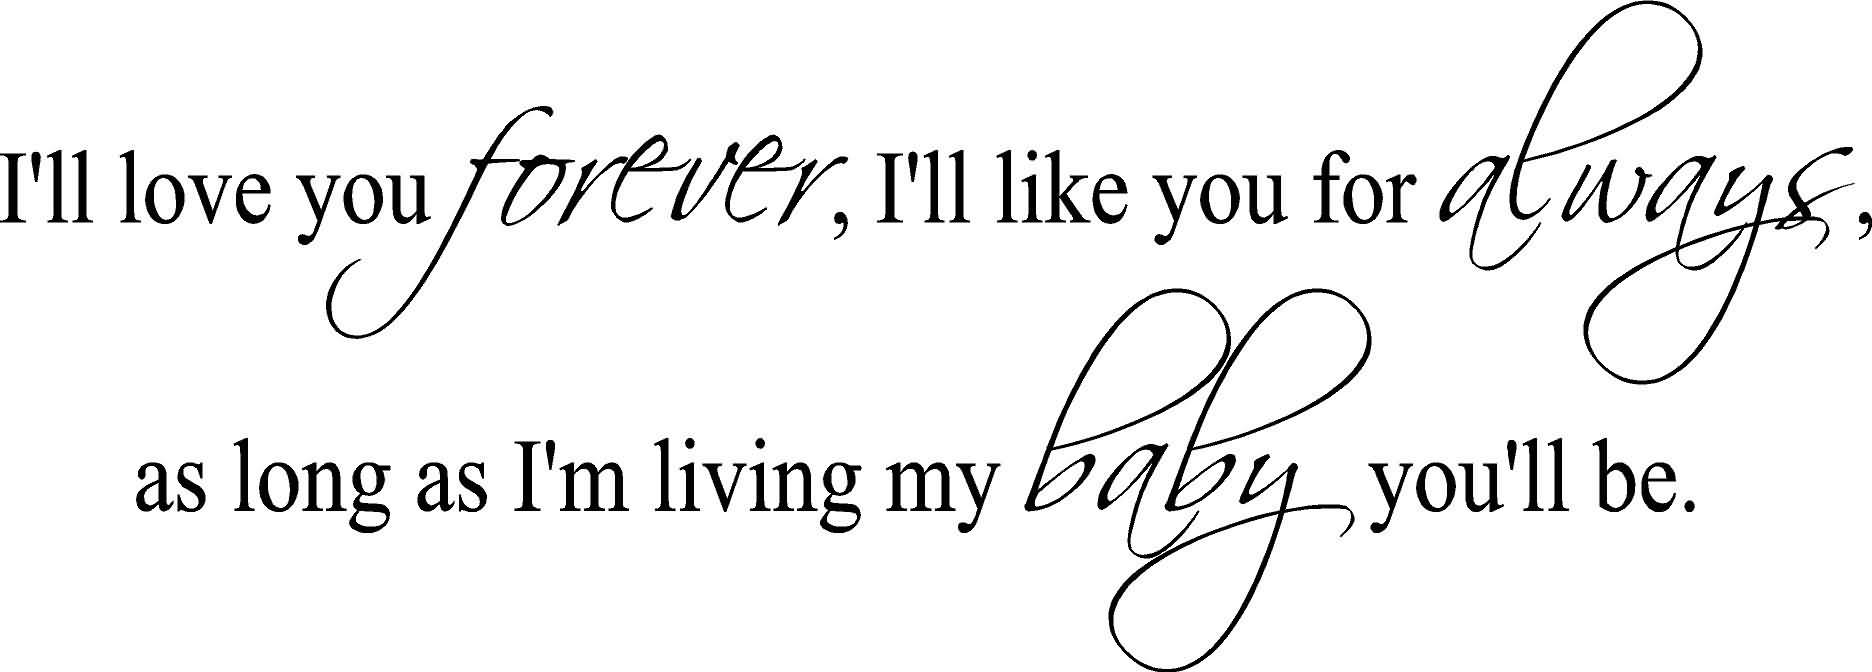 I Ll Love You Forever Quote 01